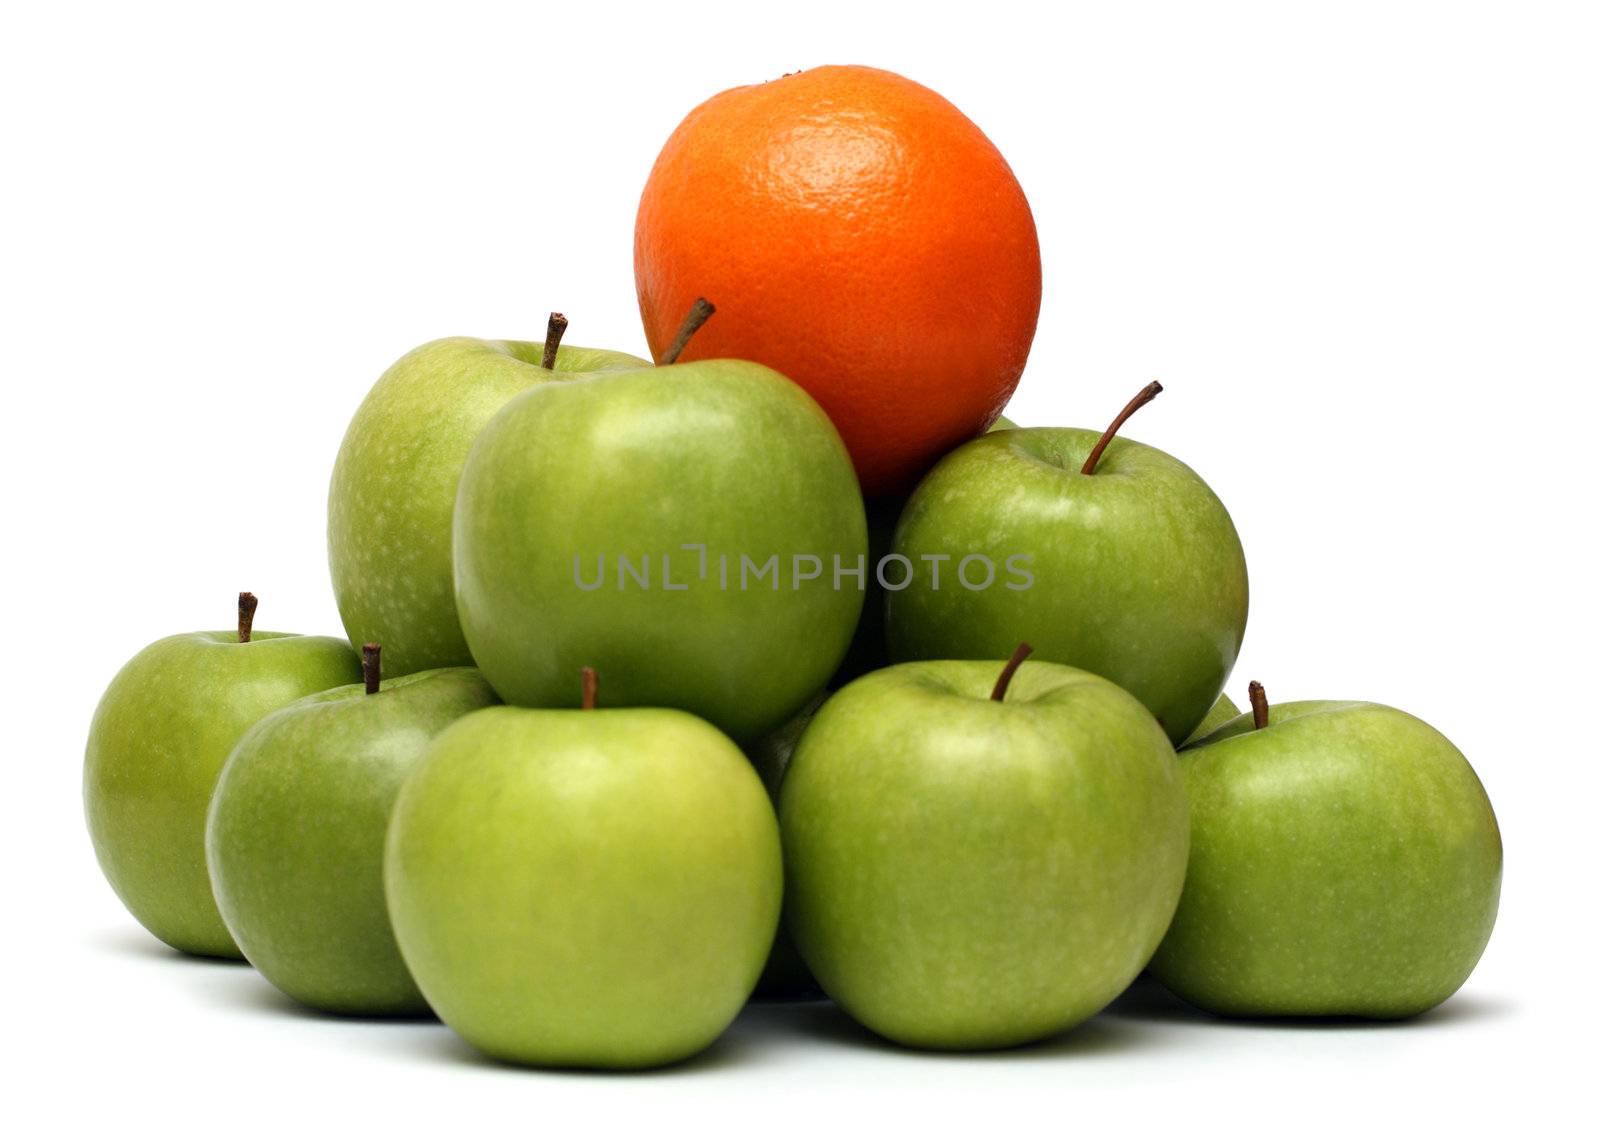 domination concepts - orange on pyramyd of apples by Mikko